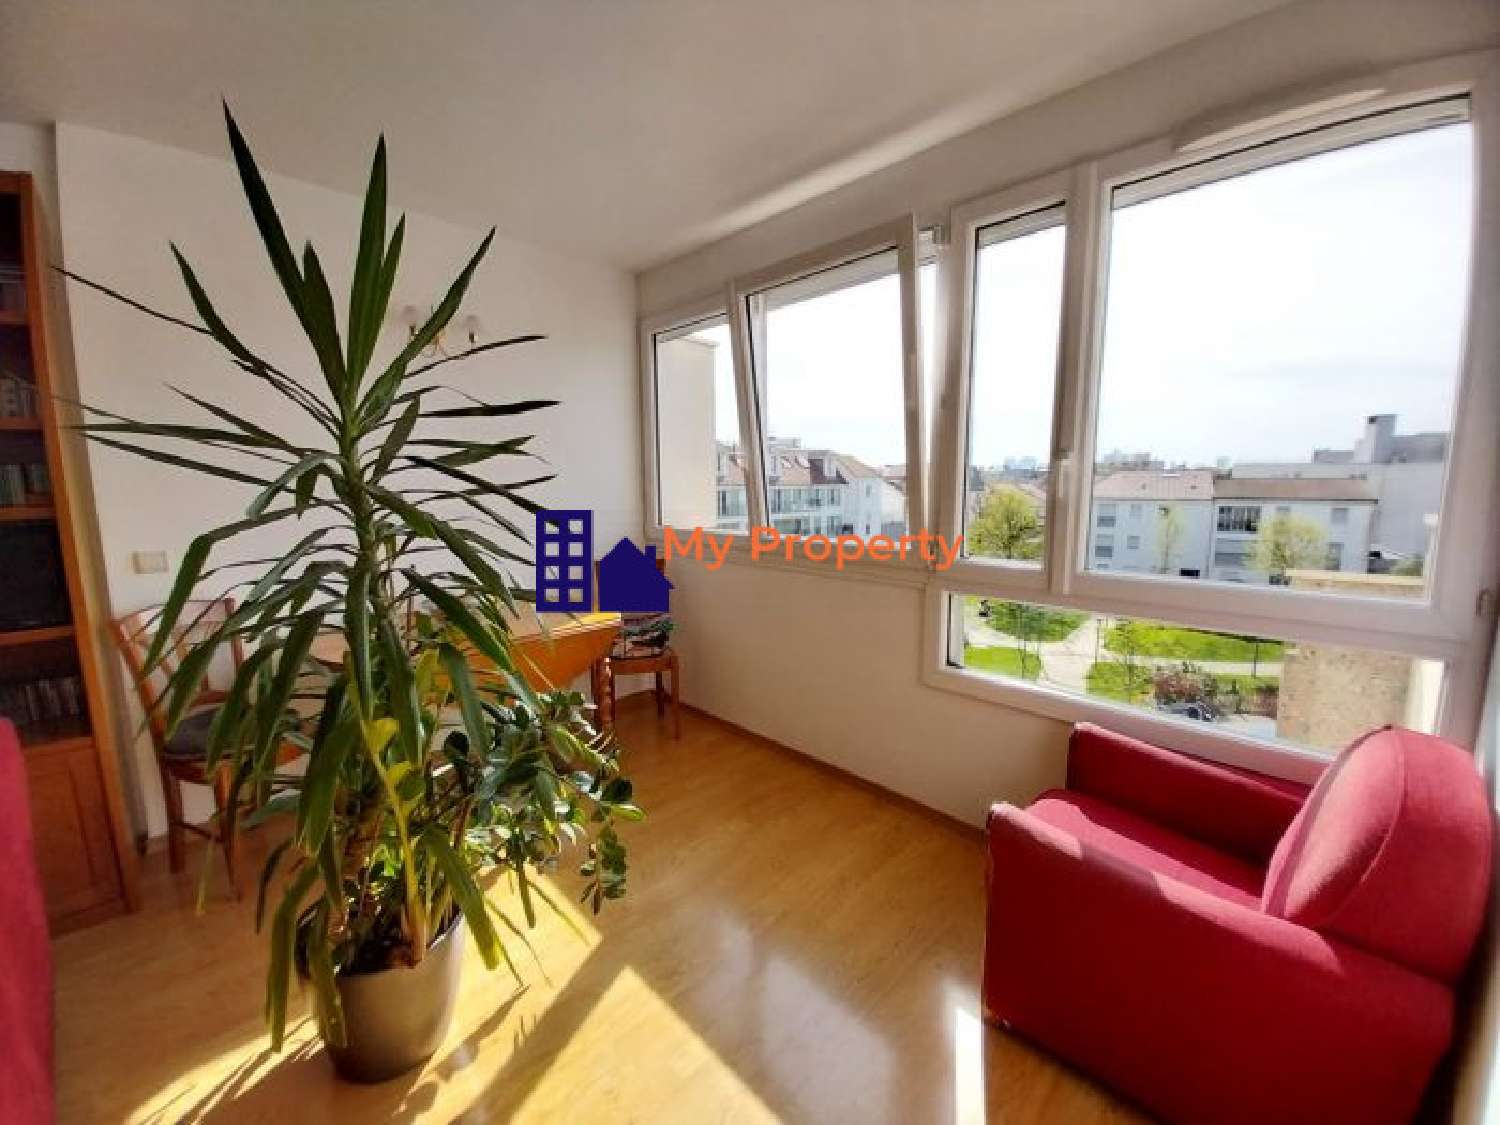  for sale apartment Houilles Yvelines 4